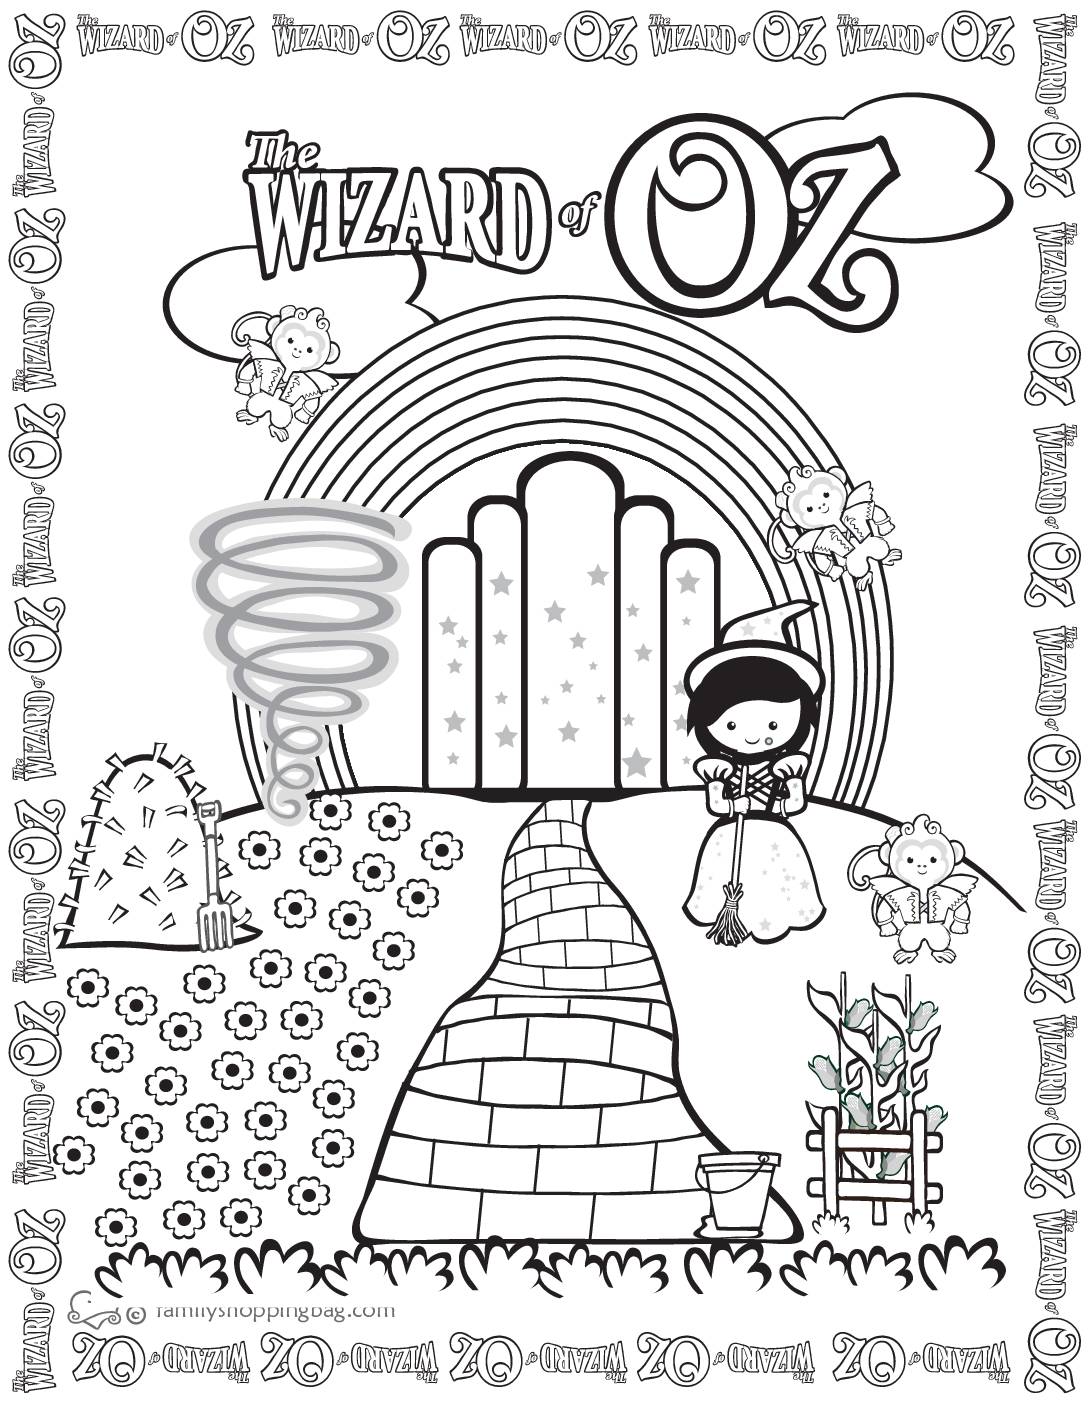 Coloring Page 2 Wizard of Oz Coloring Pages